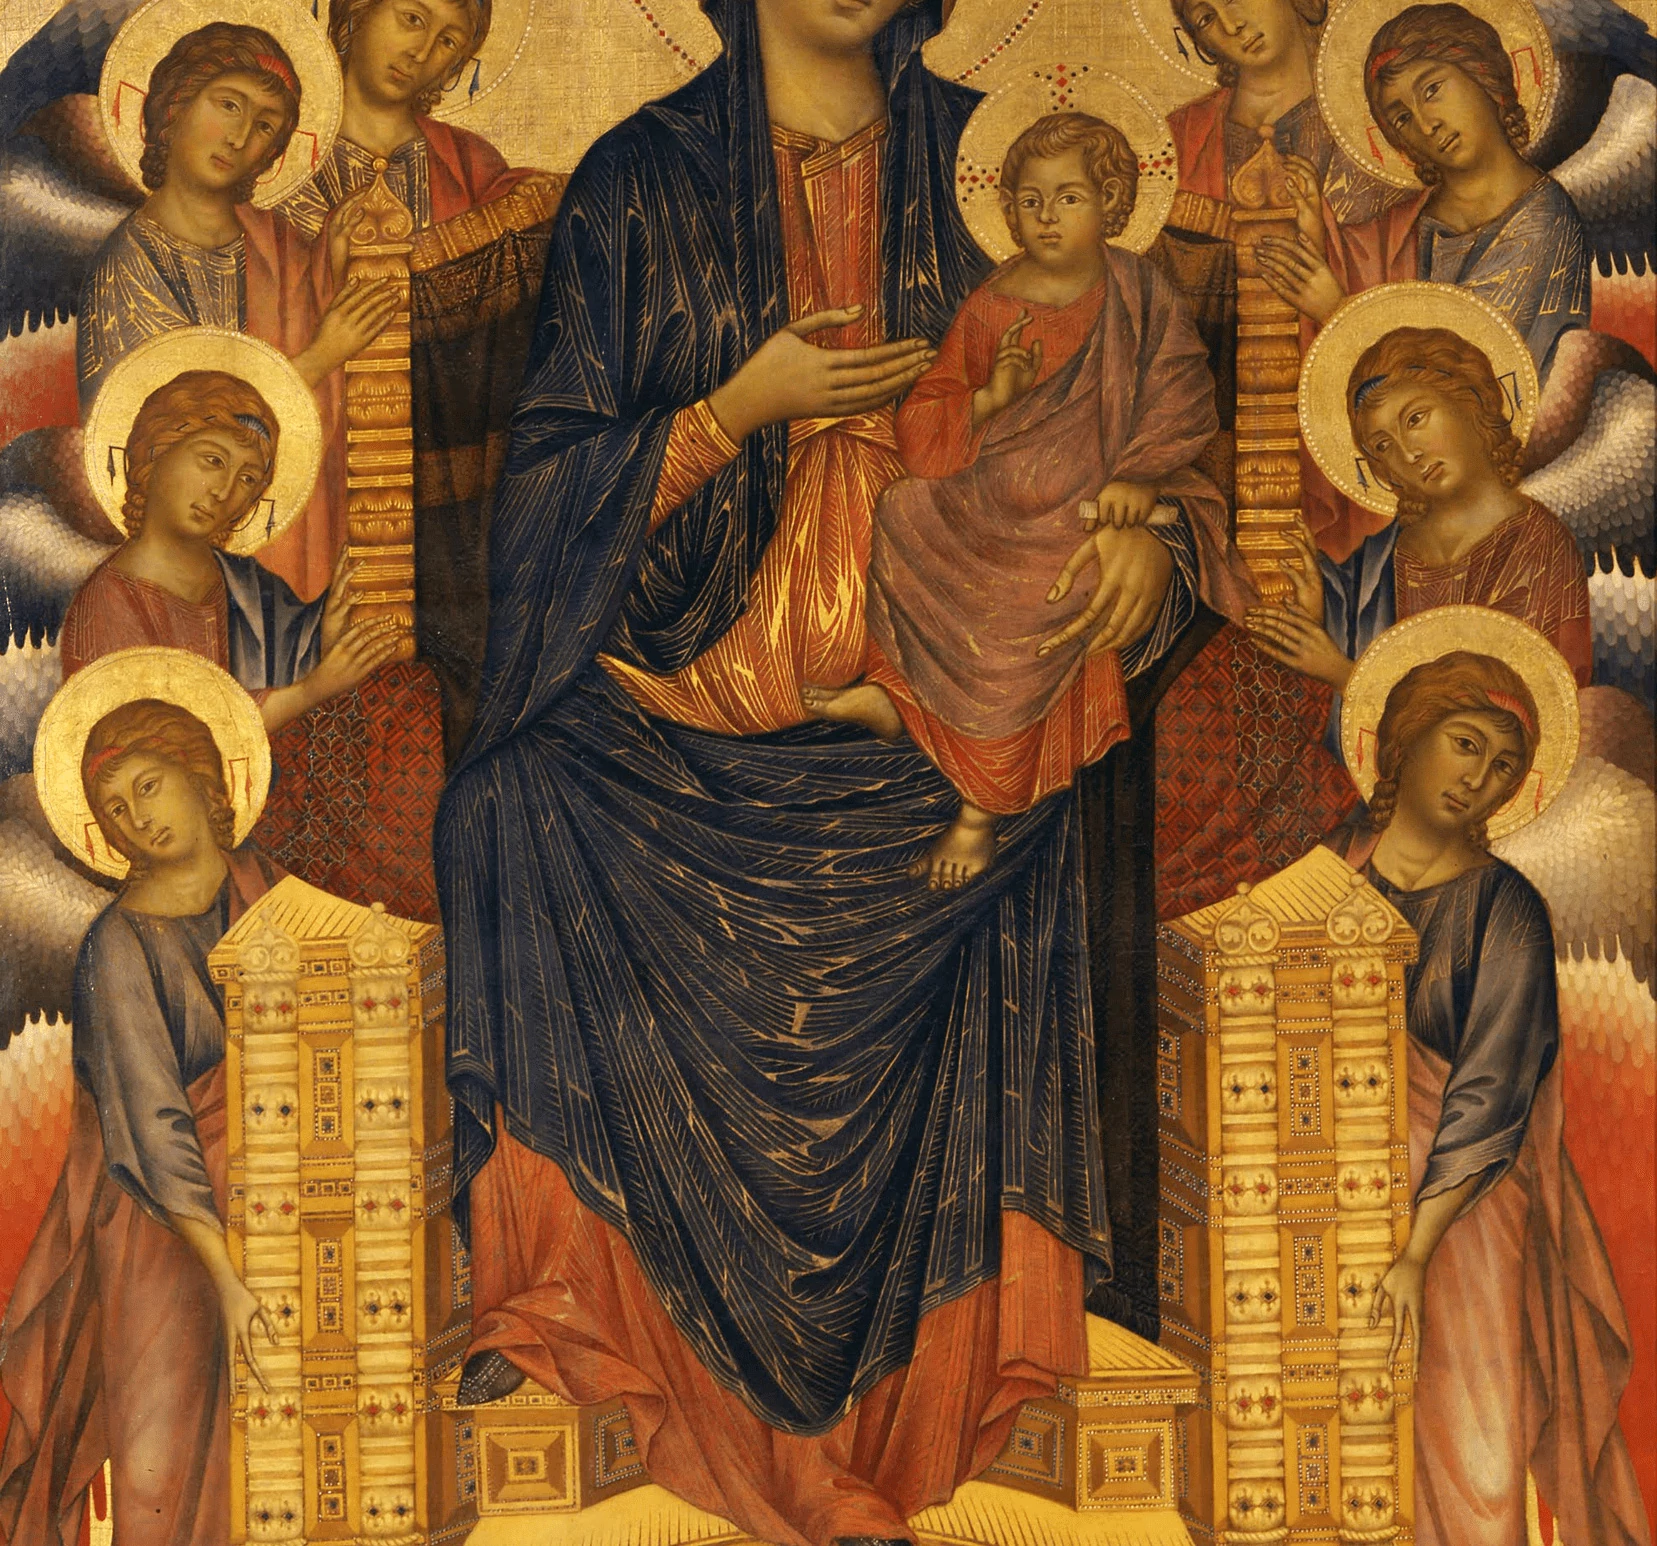 Cimabue, The Artists